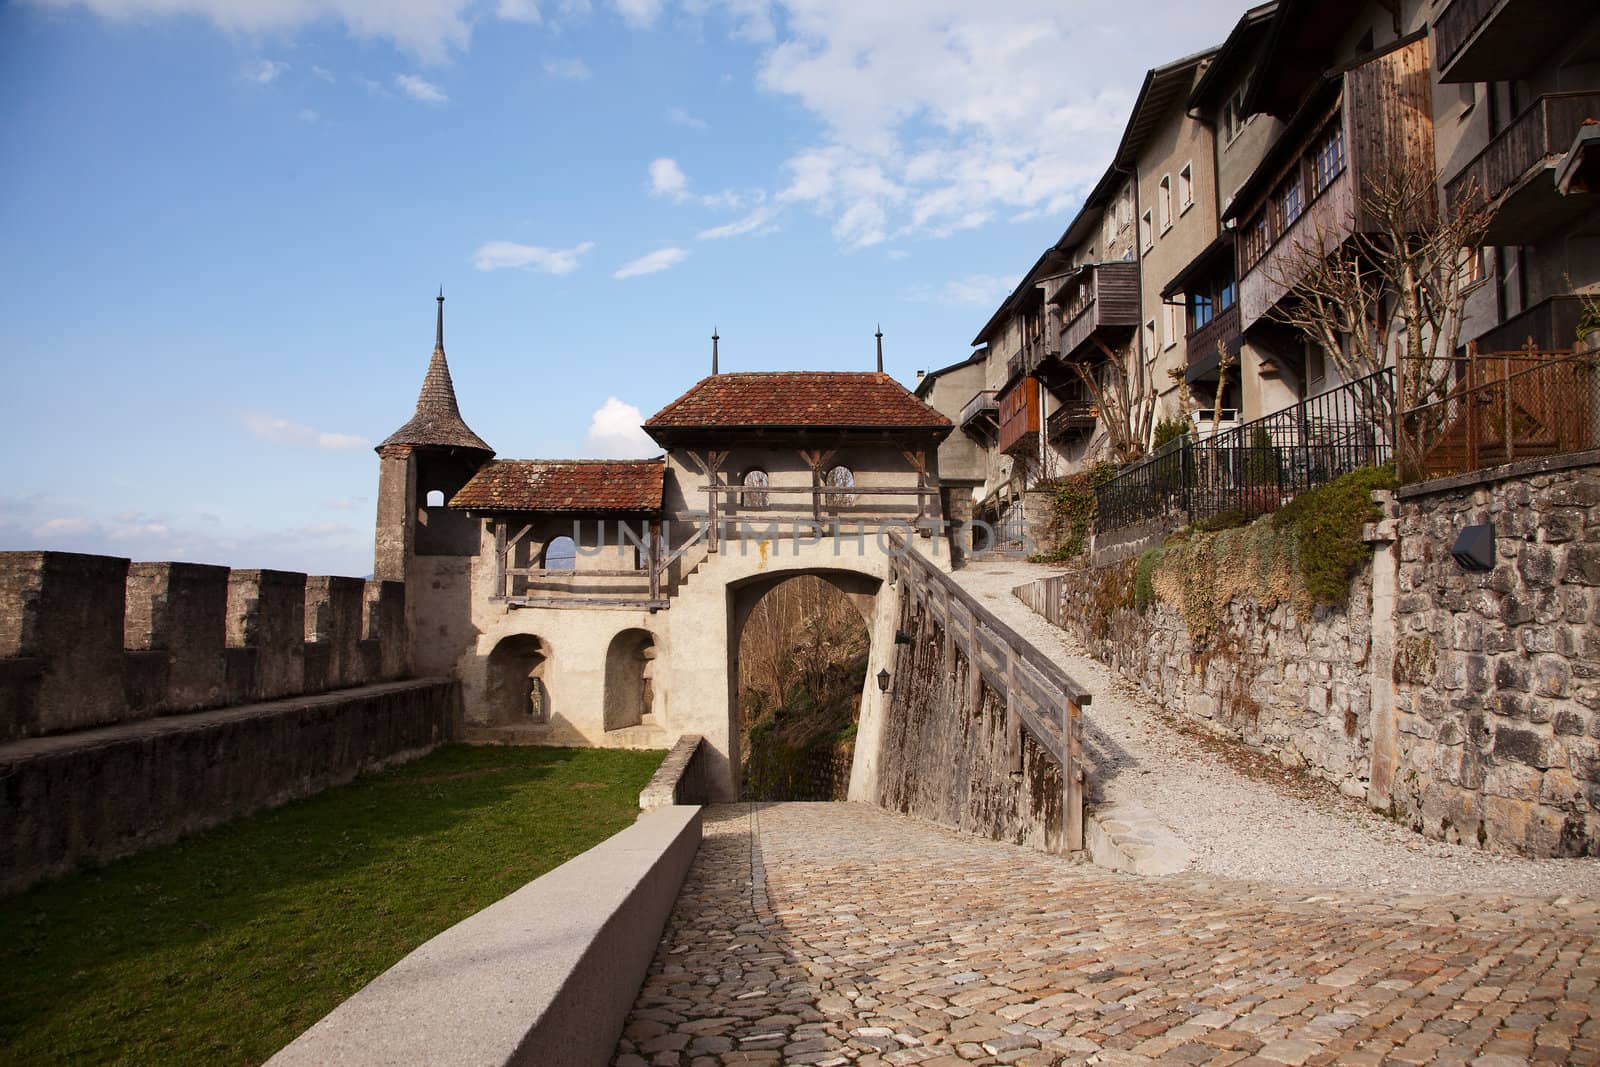 The Castle of Gruyères (Château de Gruyères), located in the medieval town of Gruyères, Fribourg, is one of the most famous in Switzerland. It is a Swiss heritage site of national significance.